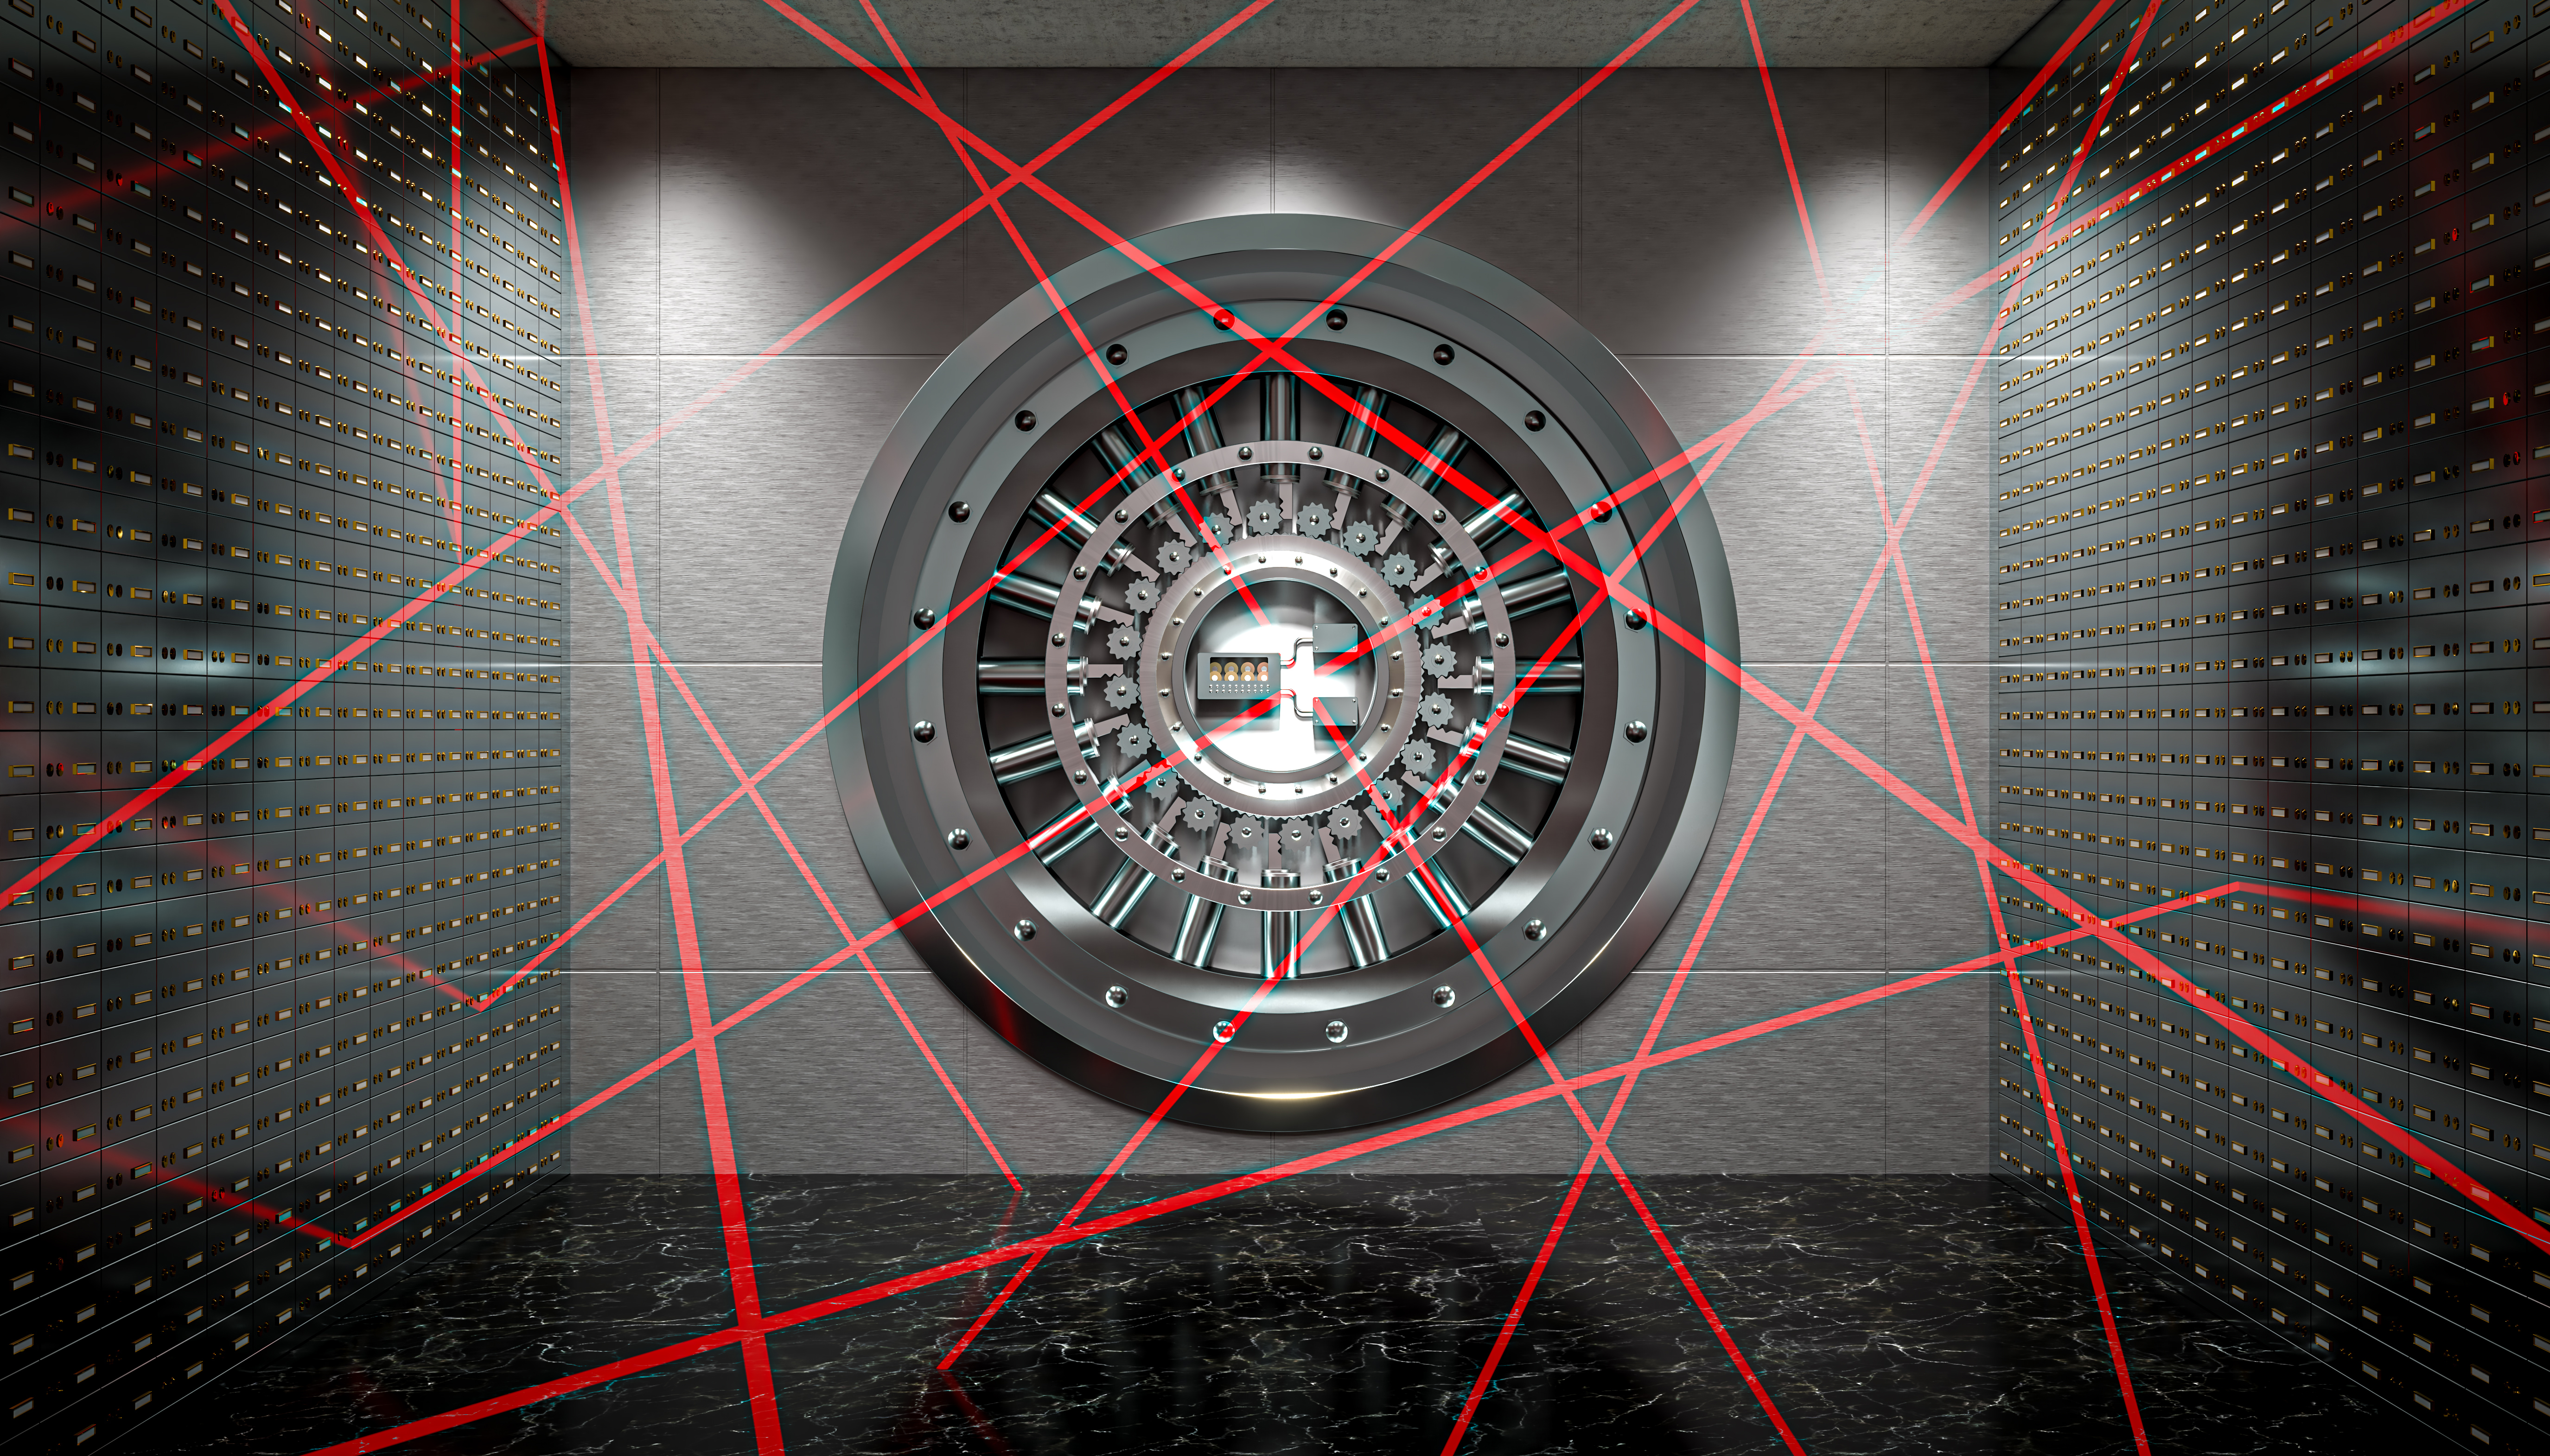 Verwoesting schuld Antibiotica How Do Laser Security Systems Work? | Hunker